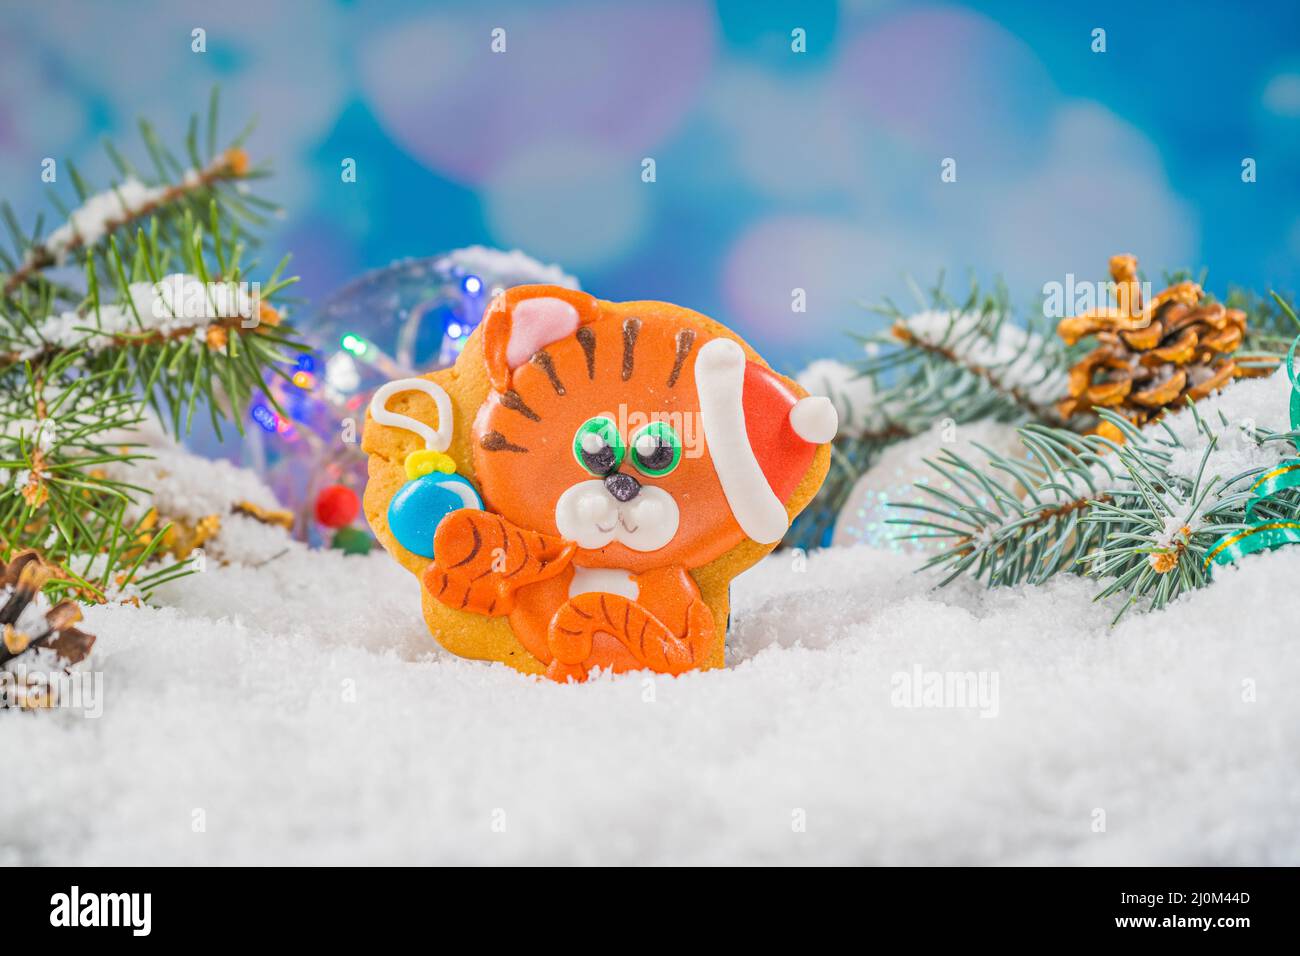 Christmas background with tiger gingerbread 2022. Holiday mood card. Family traditions, DIY, celebration concept. Festive backgr Stock Photo